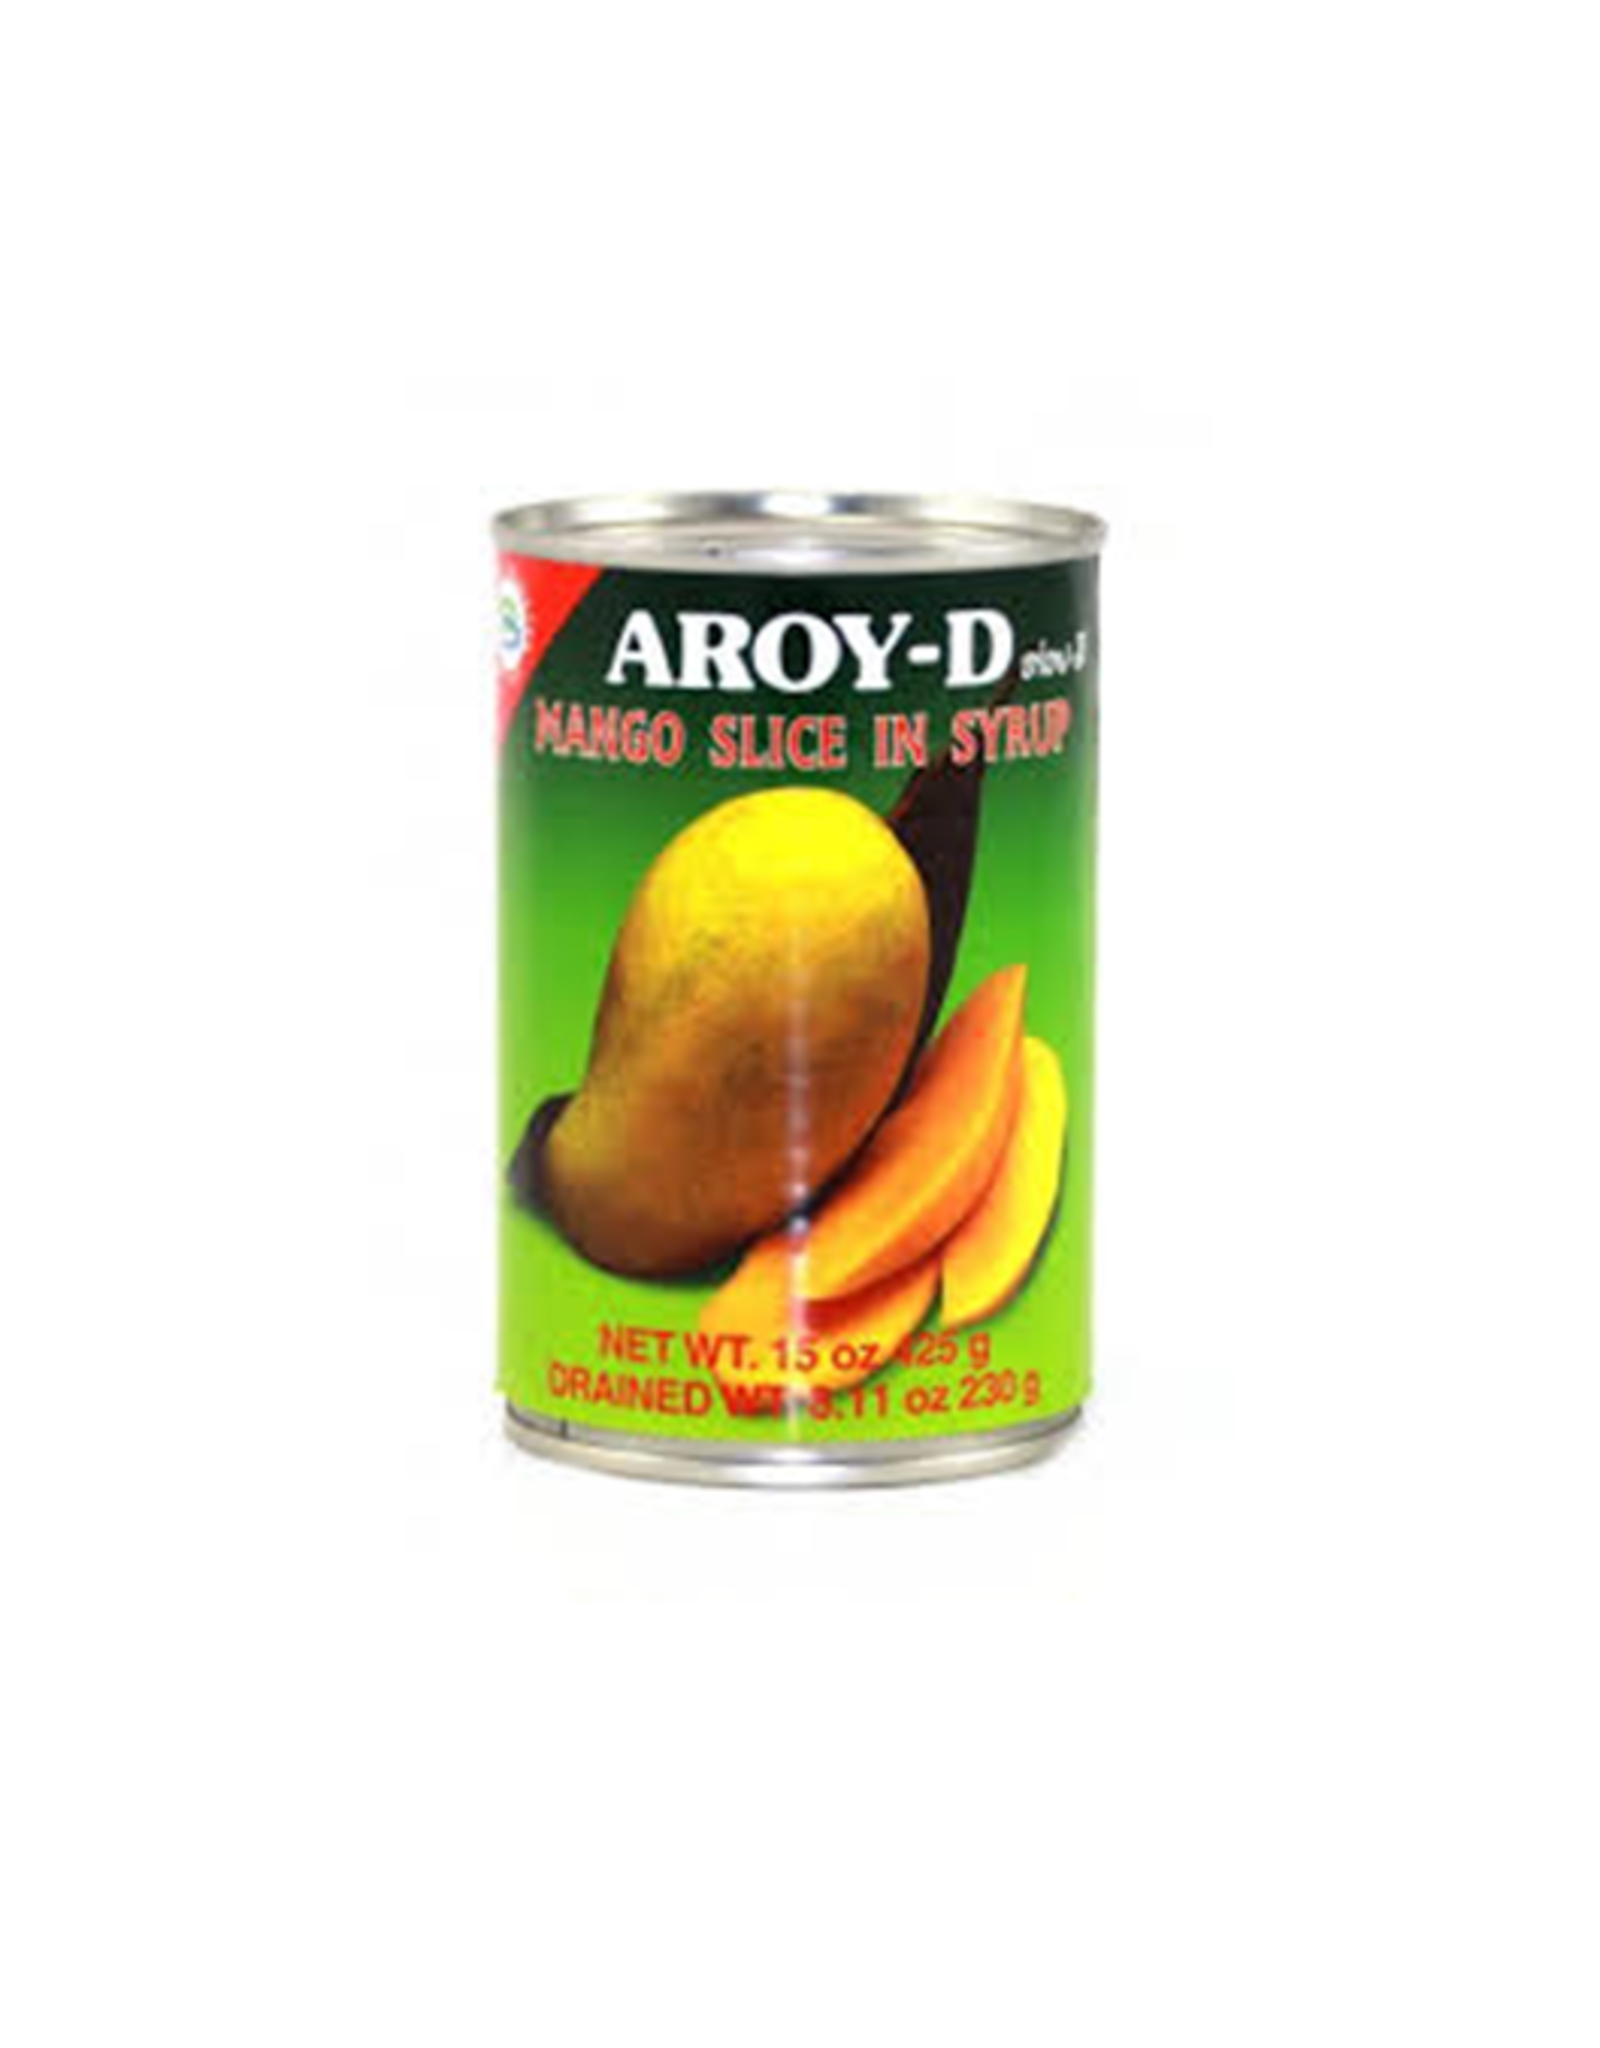 Aroy-D Mango Slices in Syup